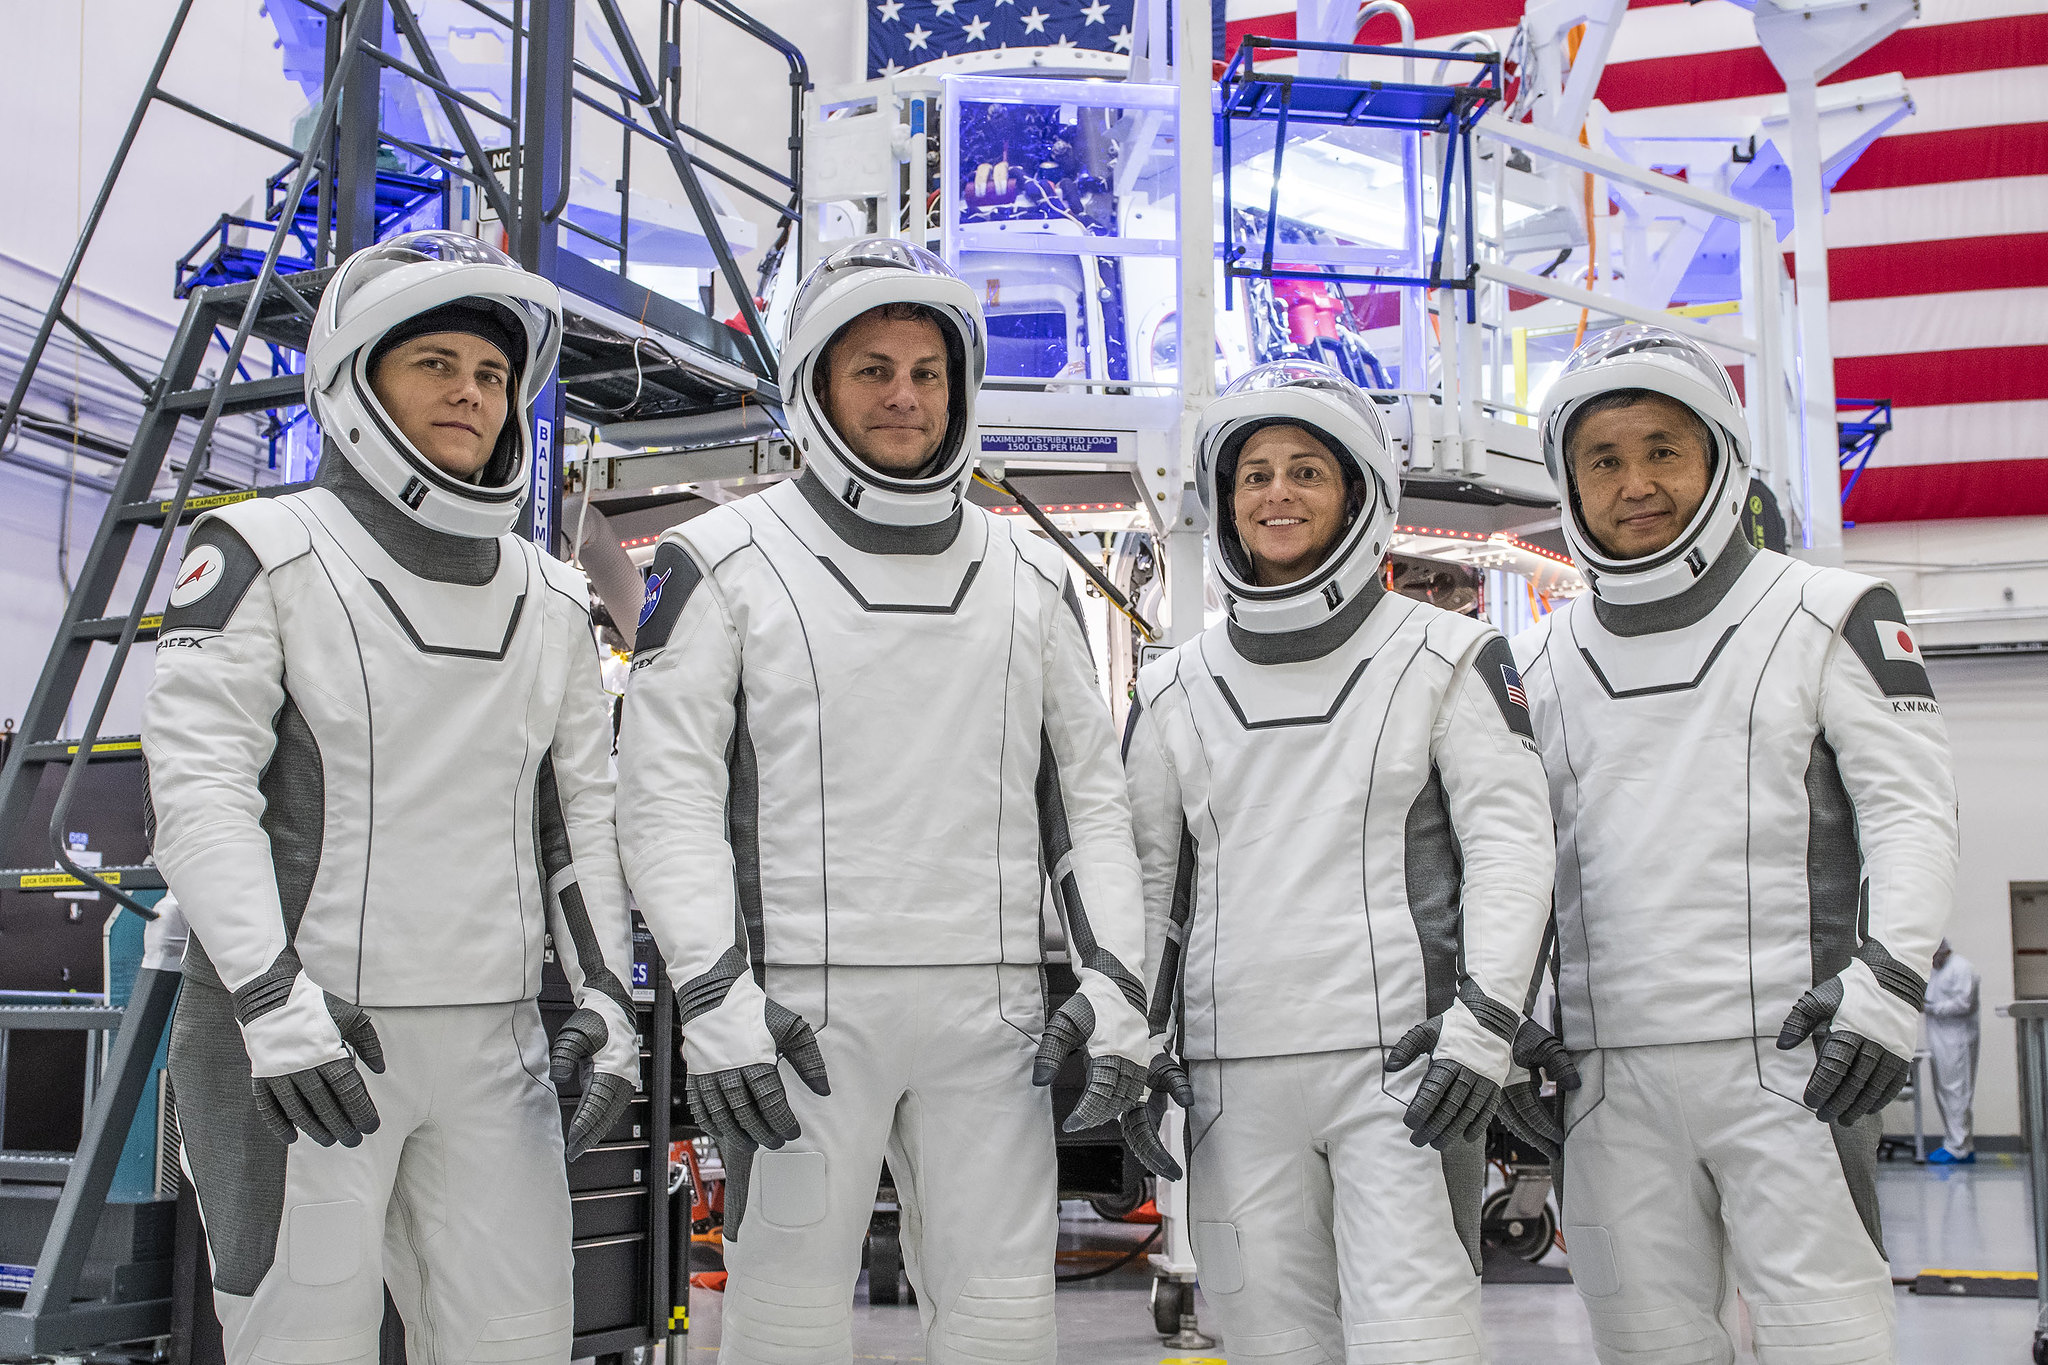 four astronauts in white spacesuits in front of space equipment